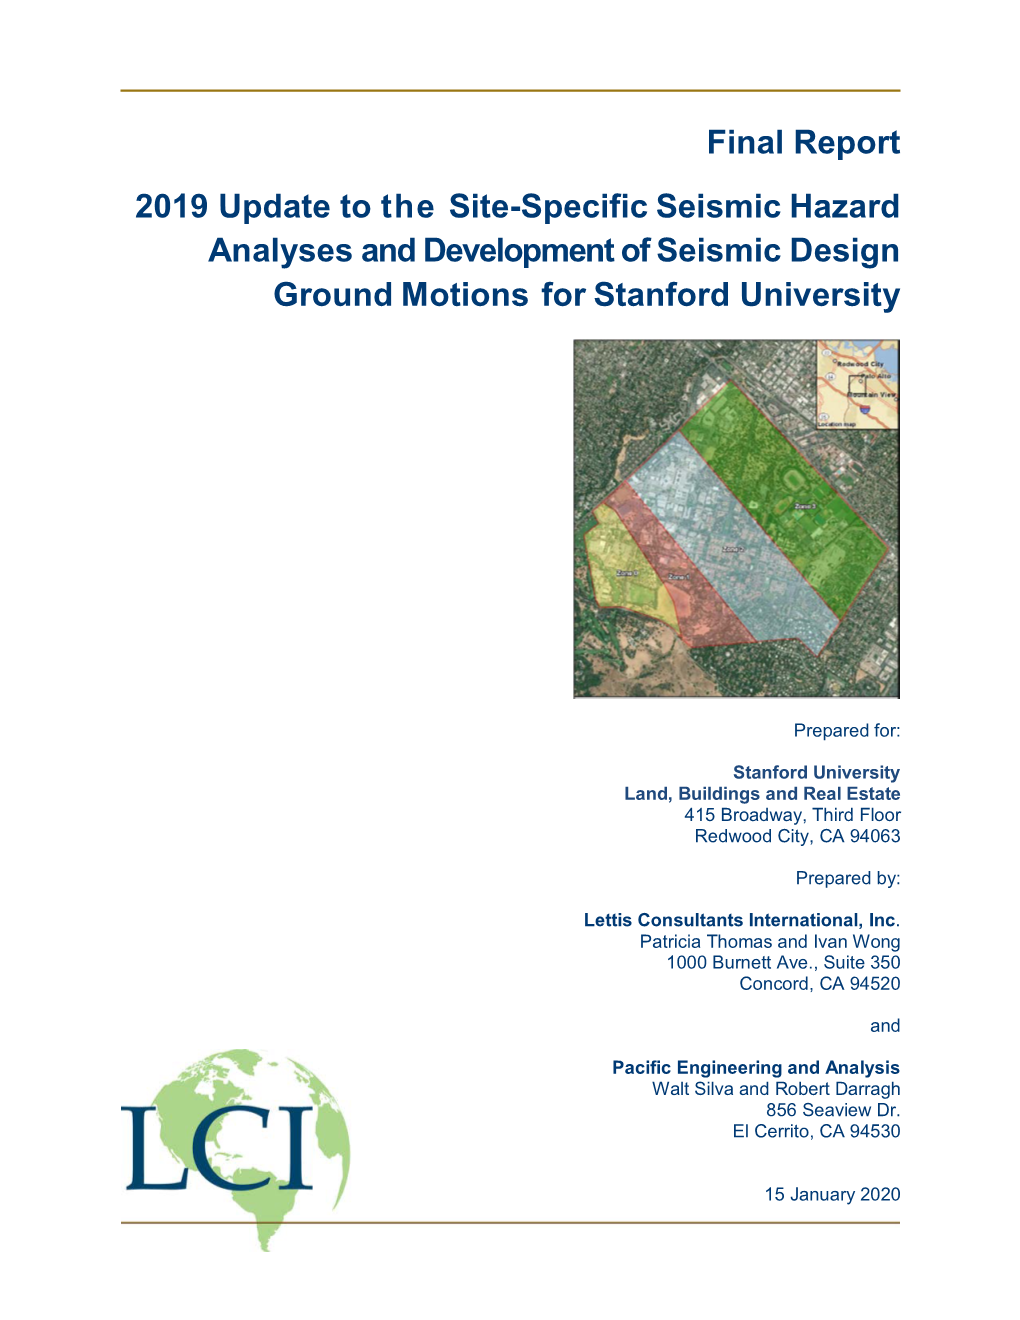 Final Report 2019 Update to the Site-Specific Seismic Hazard Analyses and Development of Seismic Design Ground Motions for Stanford University